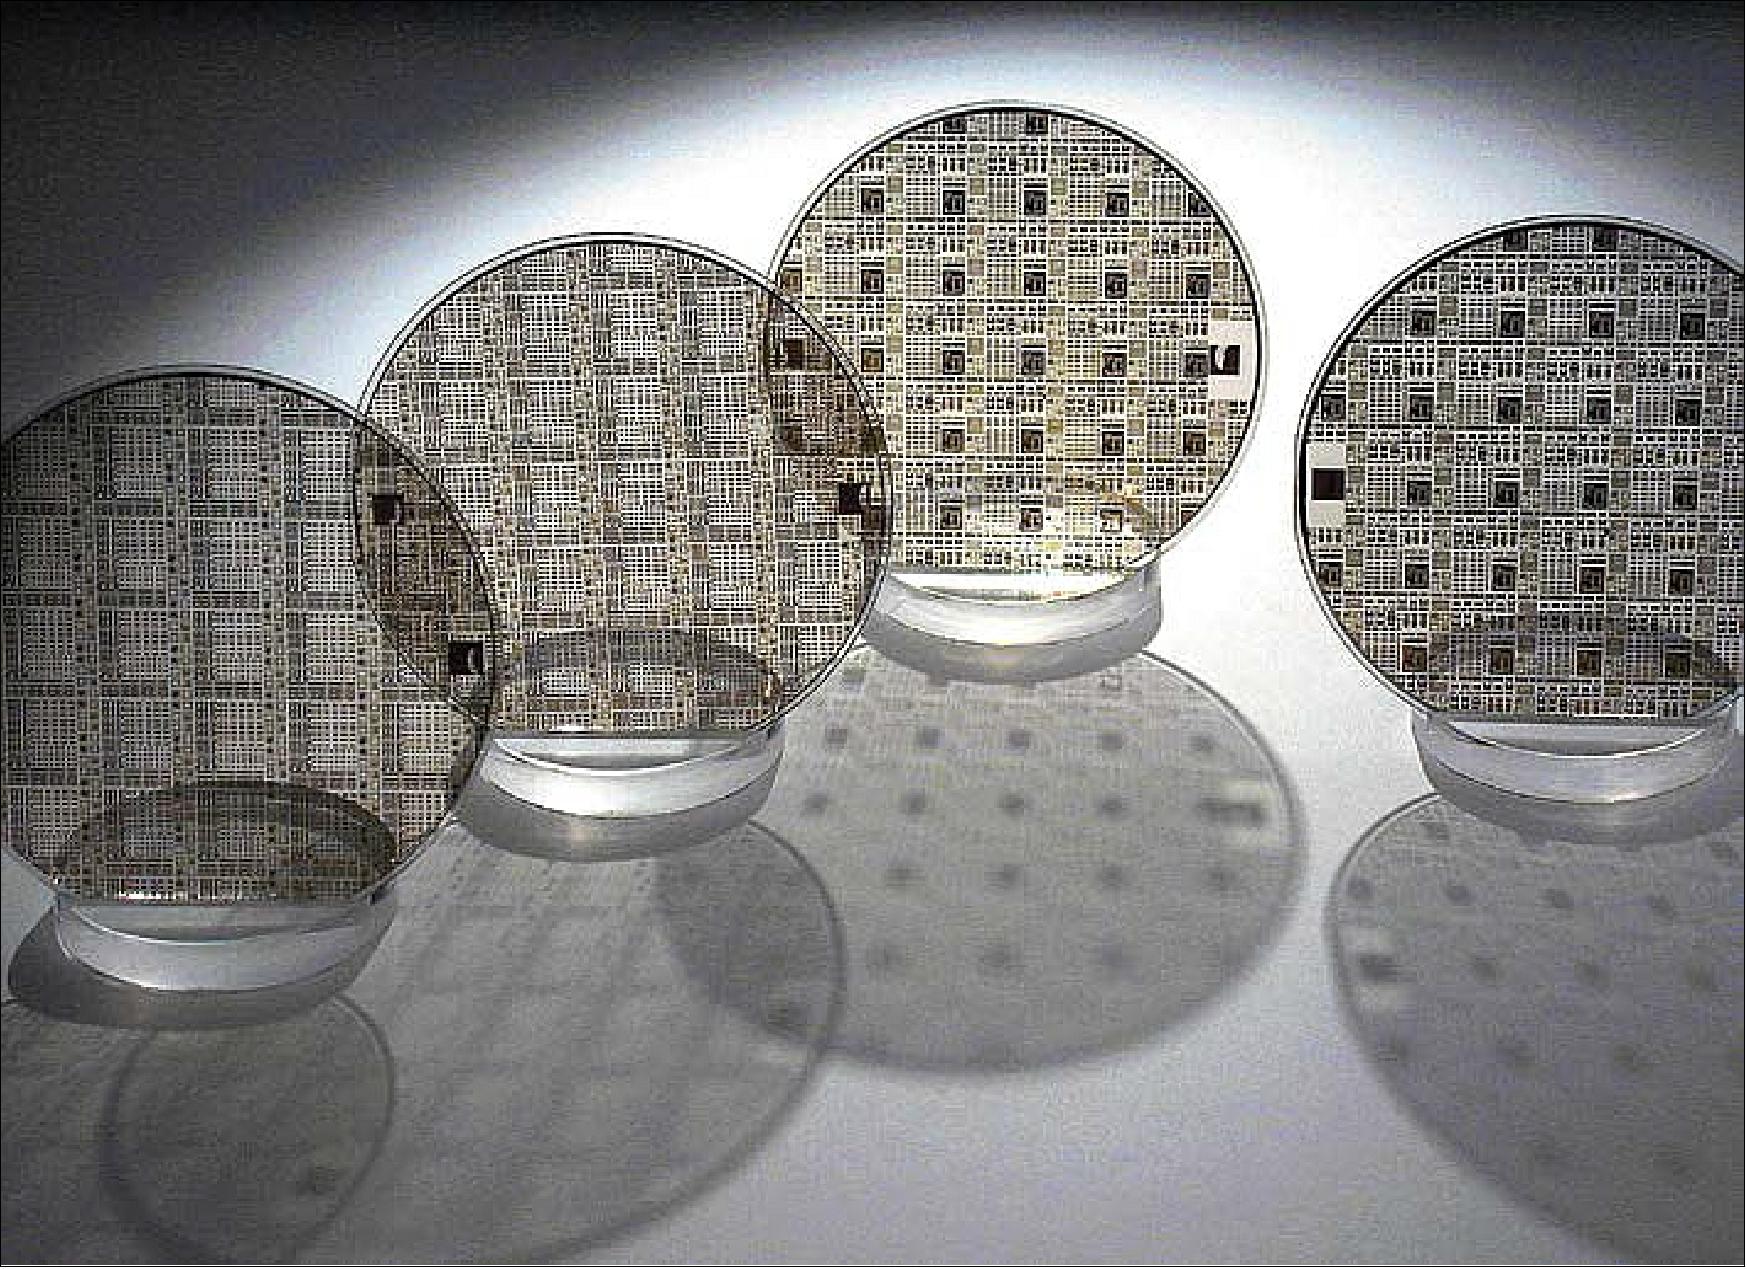 Figure 87: Gallium nitride (GaN) circuits on silicon carbide wafers: GaN as a key enabling technology for space (image credit: ESA)